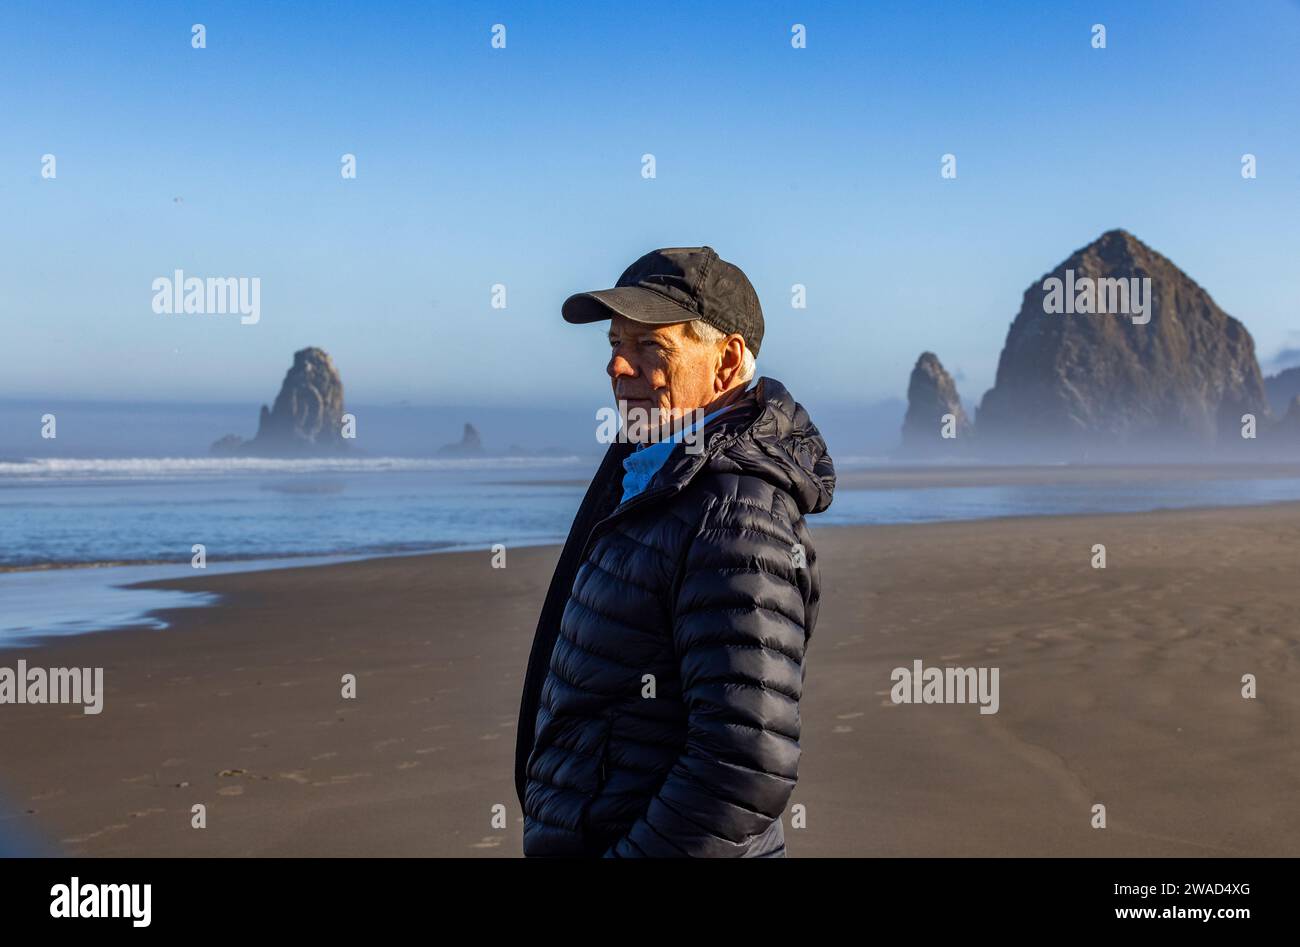 USA, Oregon, Man standing near Haystack Rock at Cannon Beach in morning mist Stock Photo